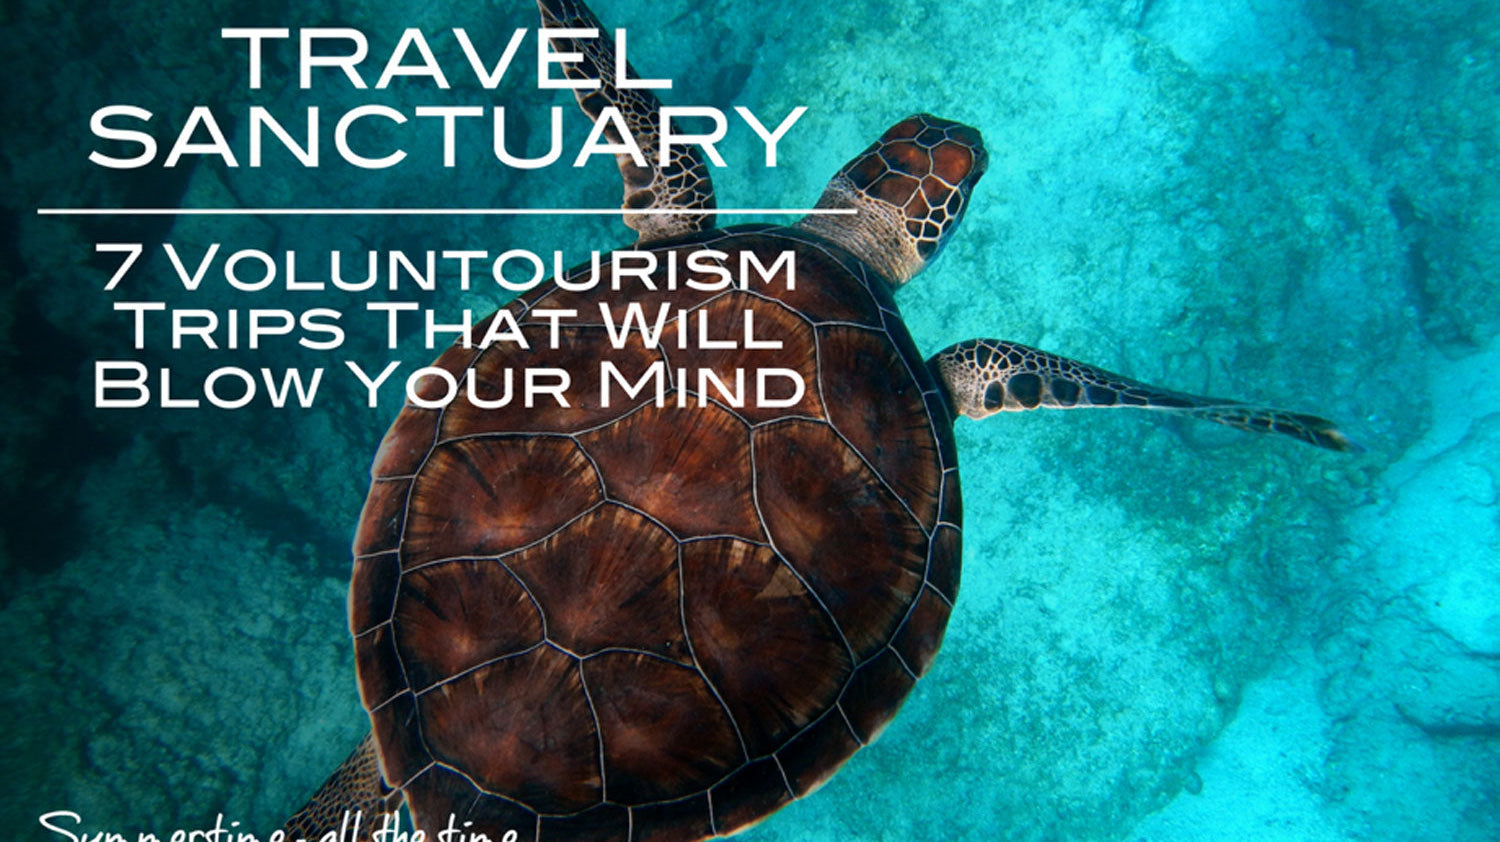 7 Voluntourism Trips That Will Blow Your Mind